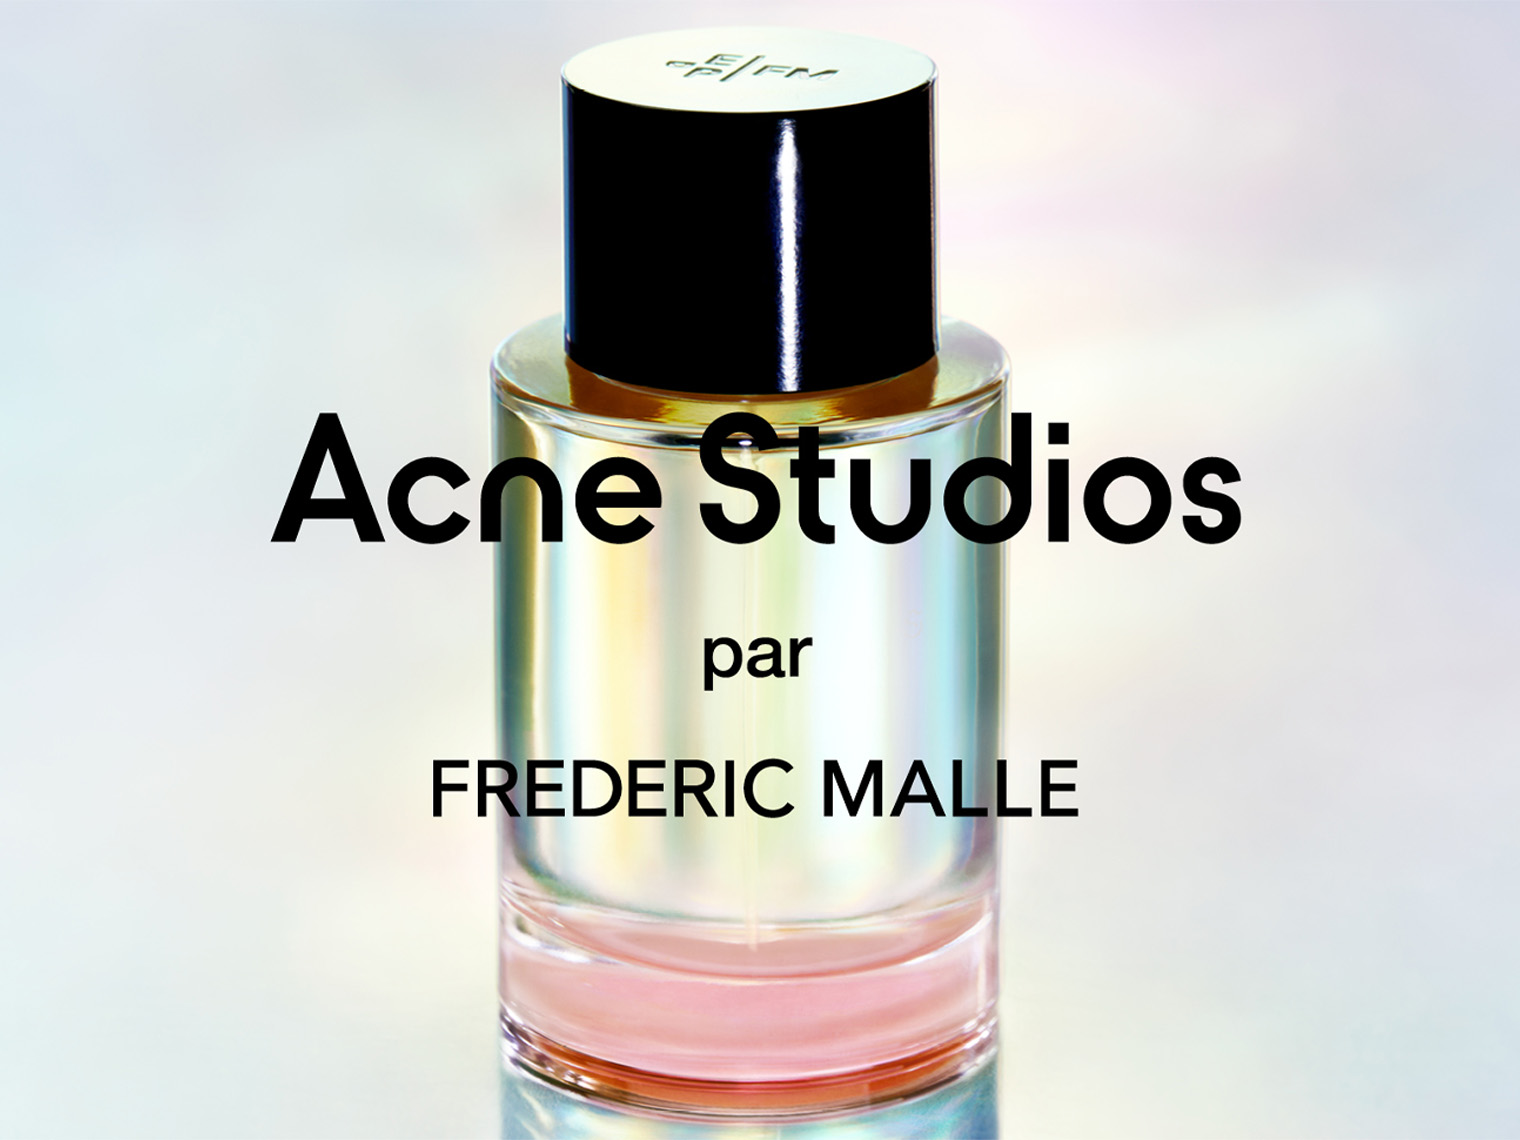 Frederic Malle x Acne